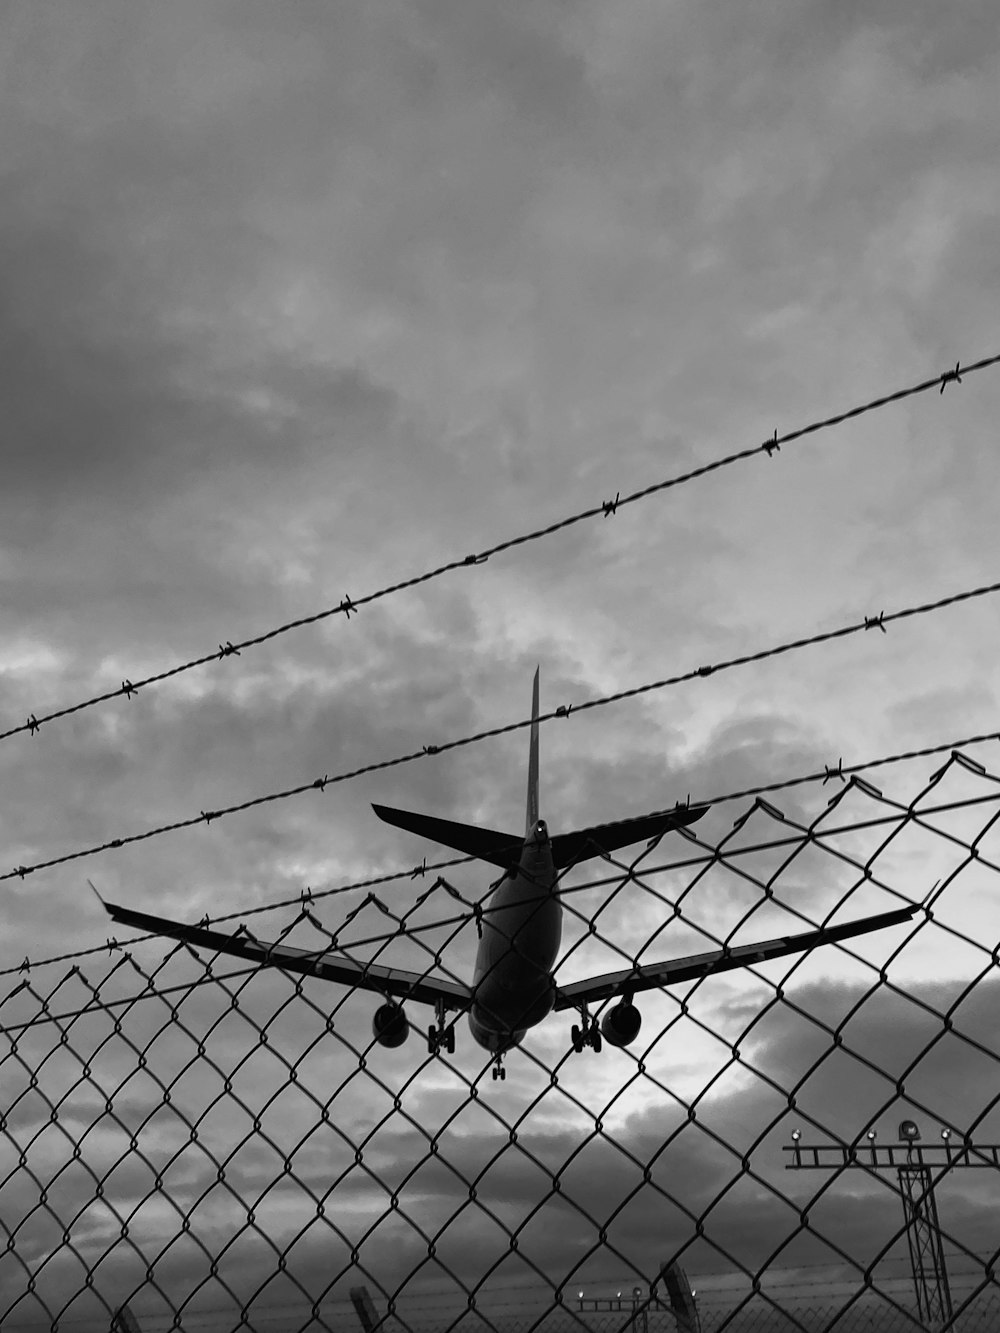 a plane flying over a fence